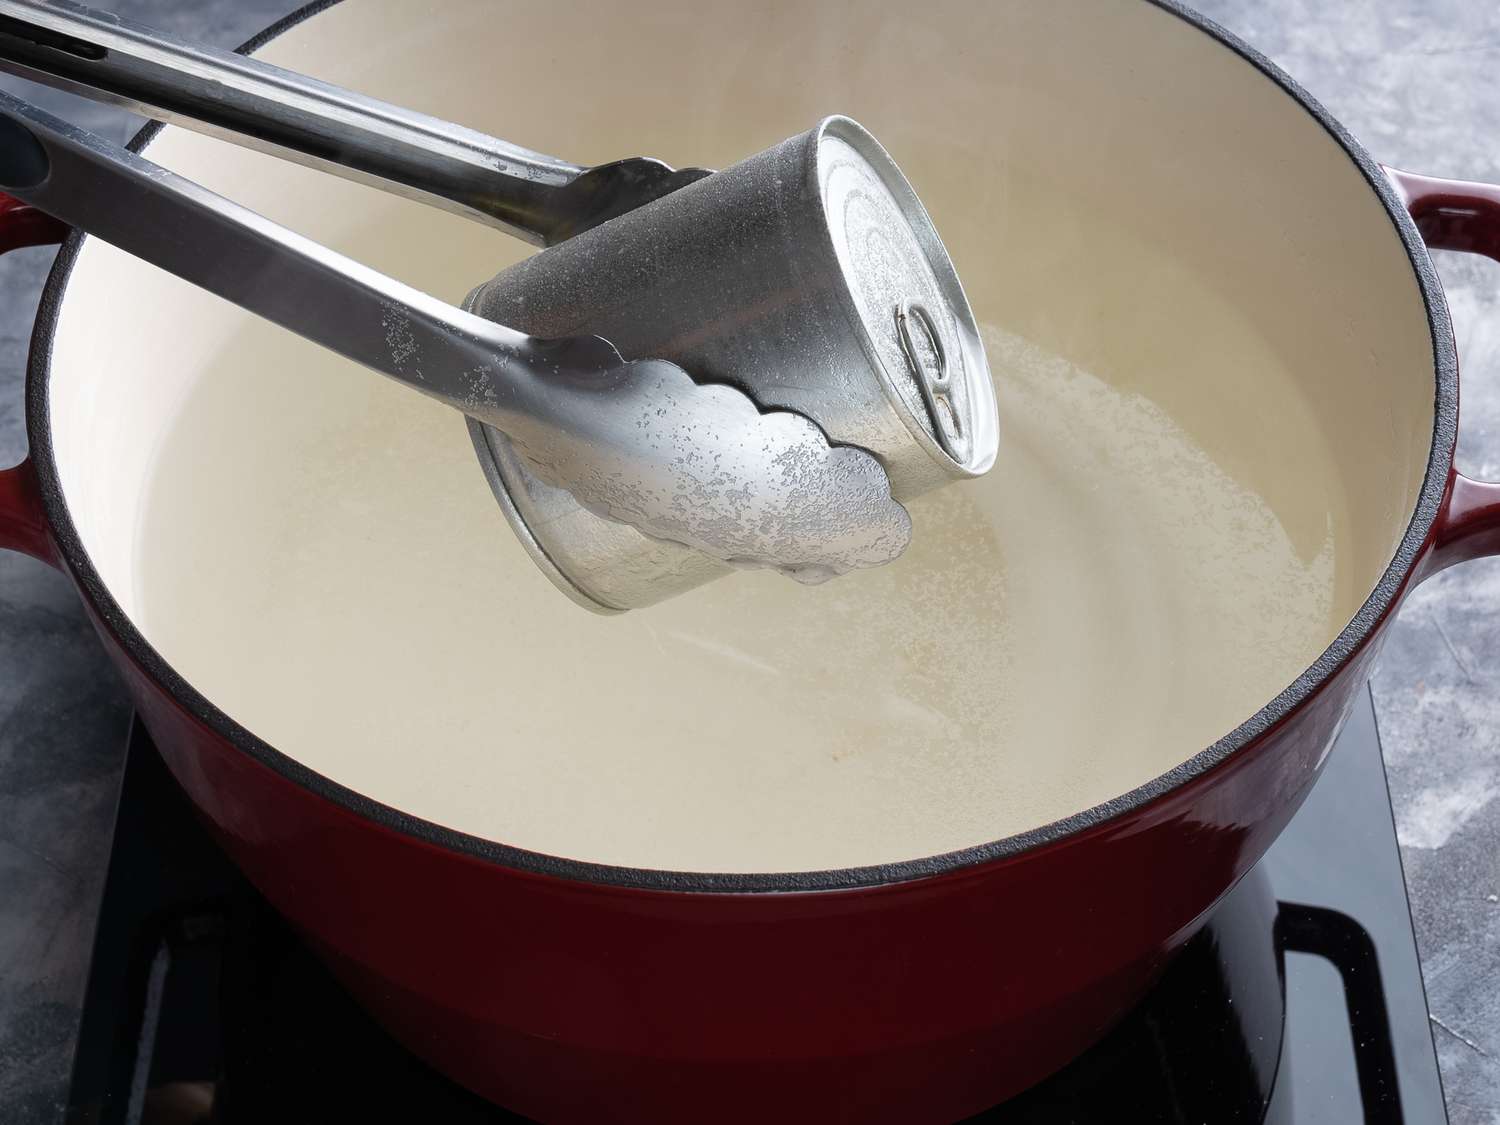 Can of dulce de leche being removed from a cast iron pan of simmering water with metal tongs